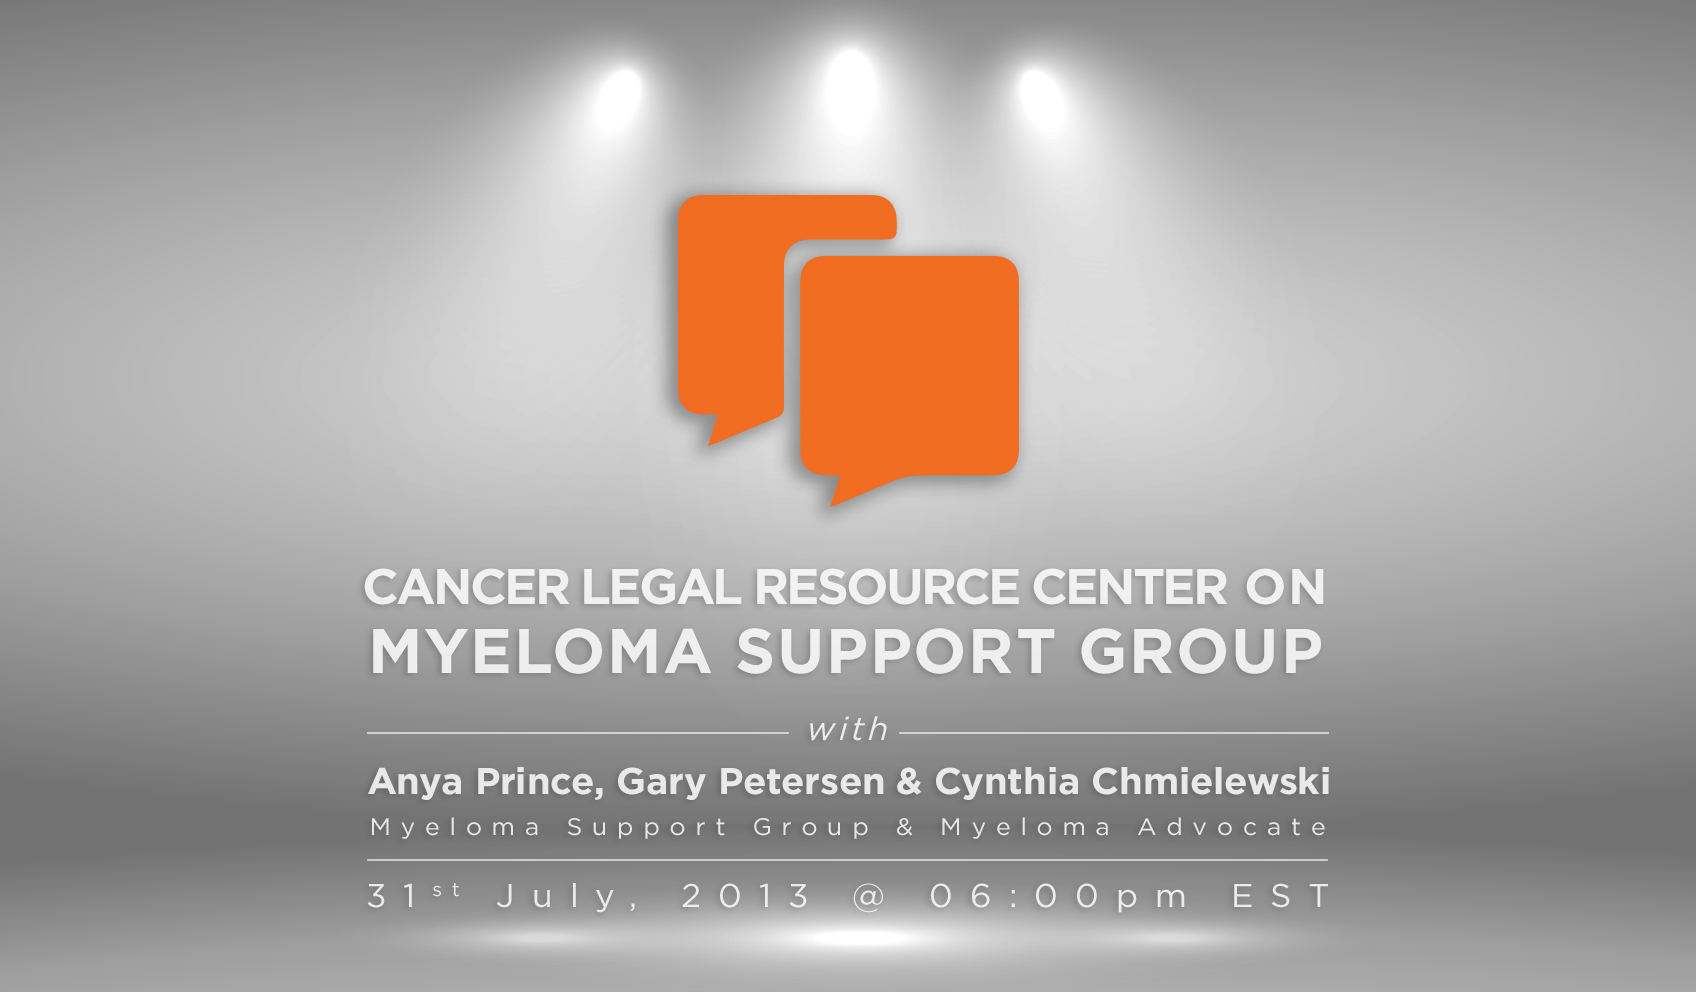 Cancer Legal Resource Center on Myeloma Support Group